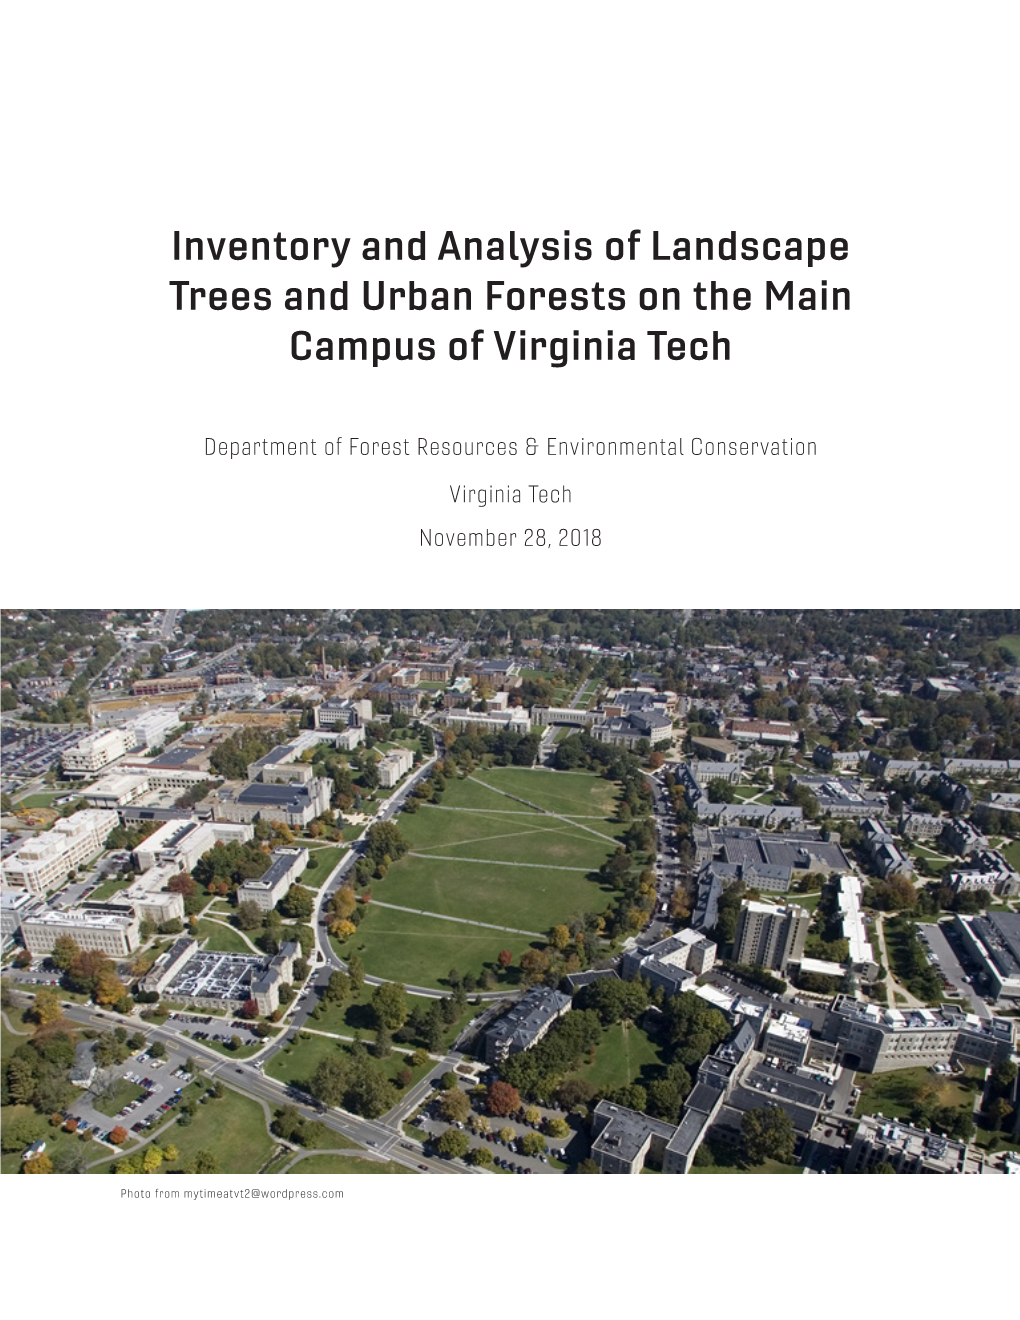 Inventory and Analysis of Landscape Trees and Urban Forests on the Main Campus of Virginia Tech